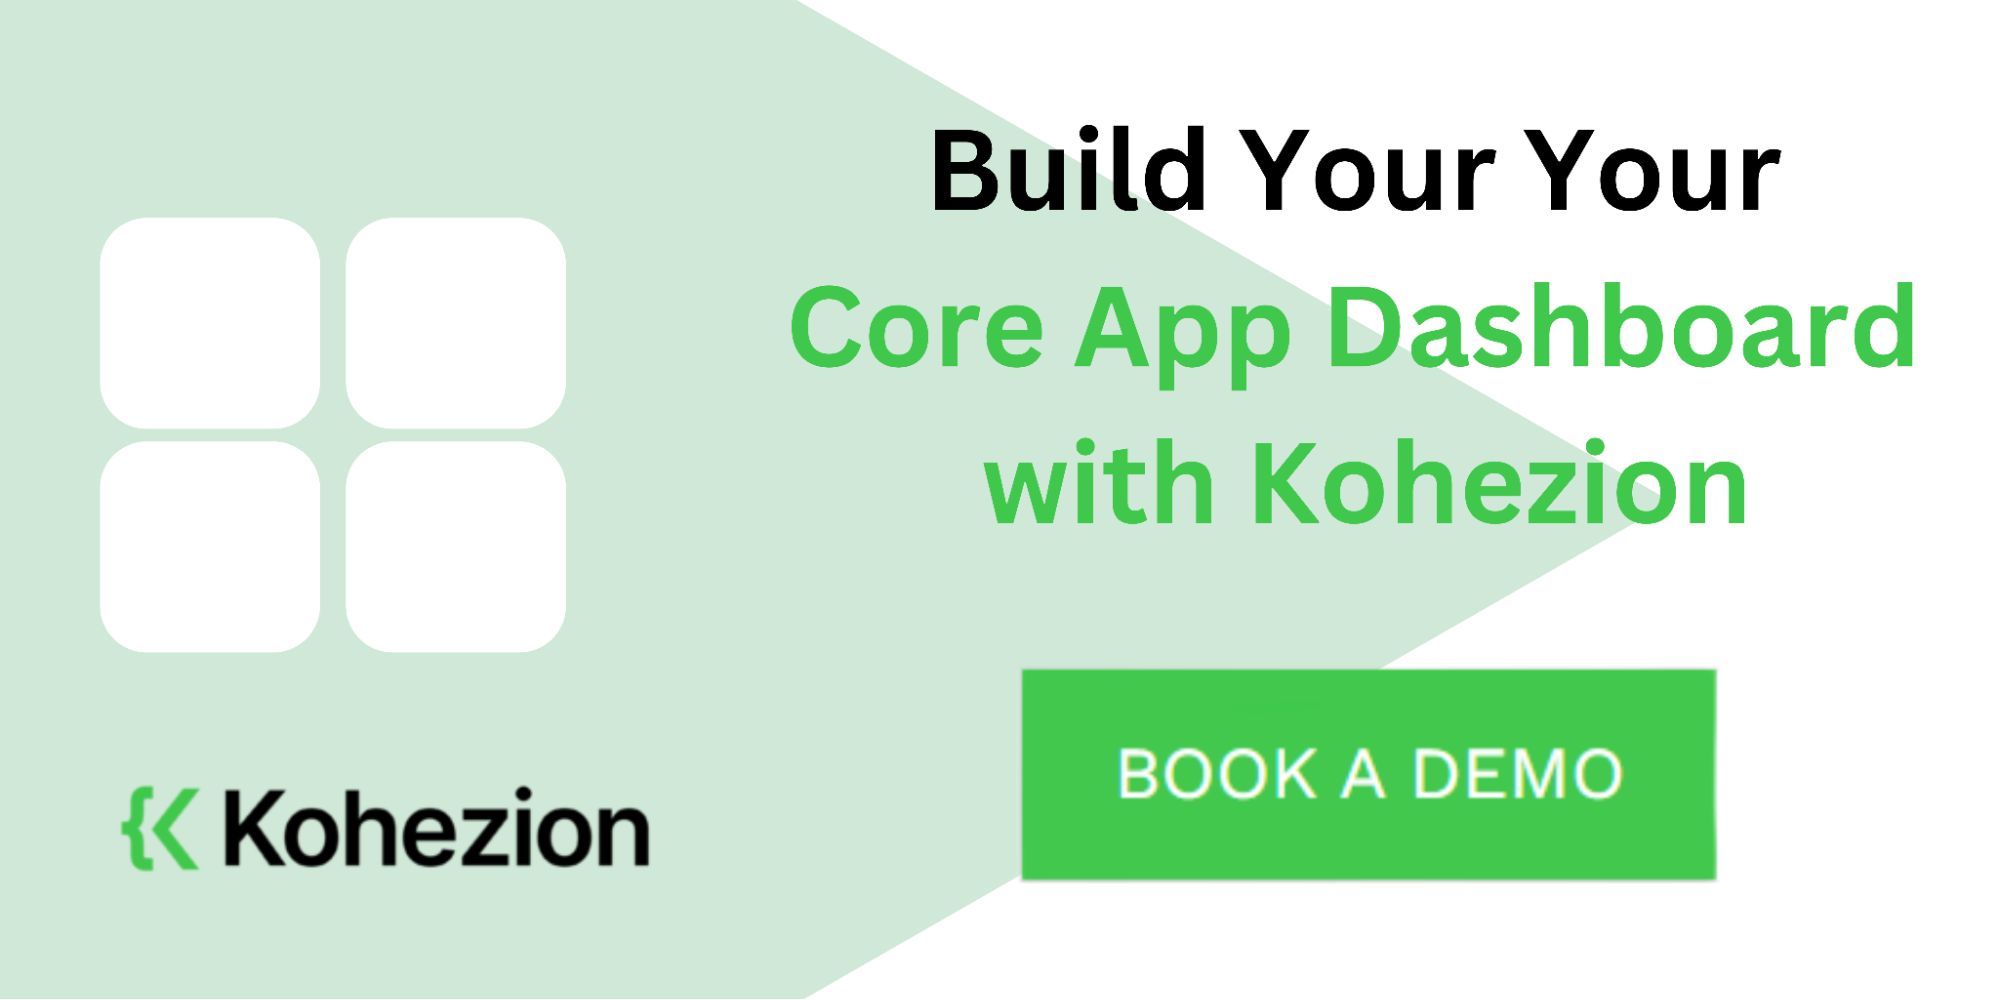  build your core app dashboard with kohezion